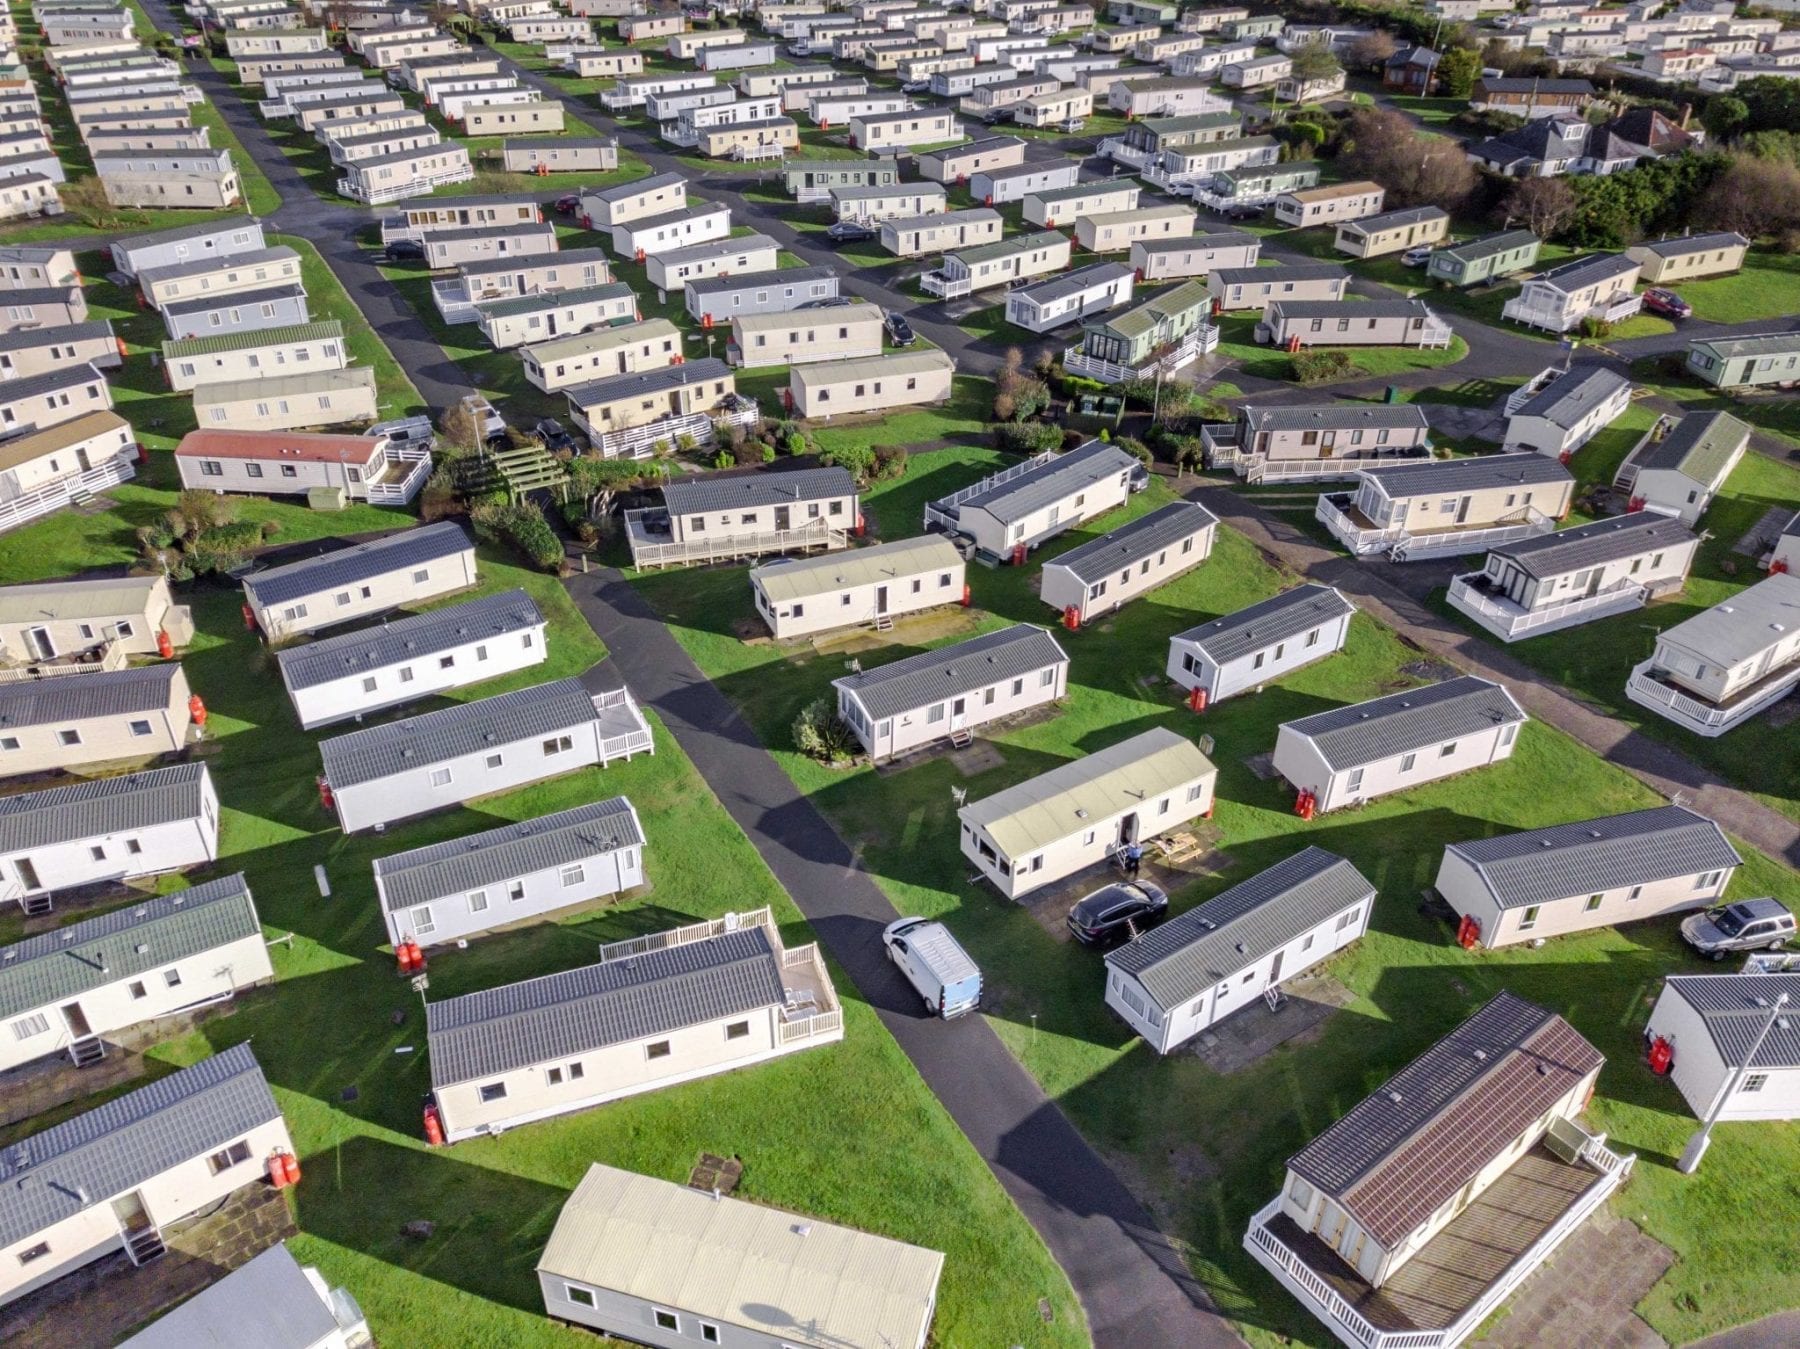 View from above of a mobile home park